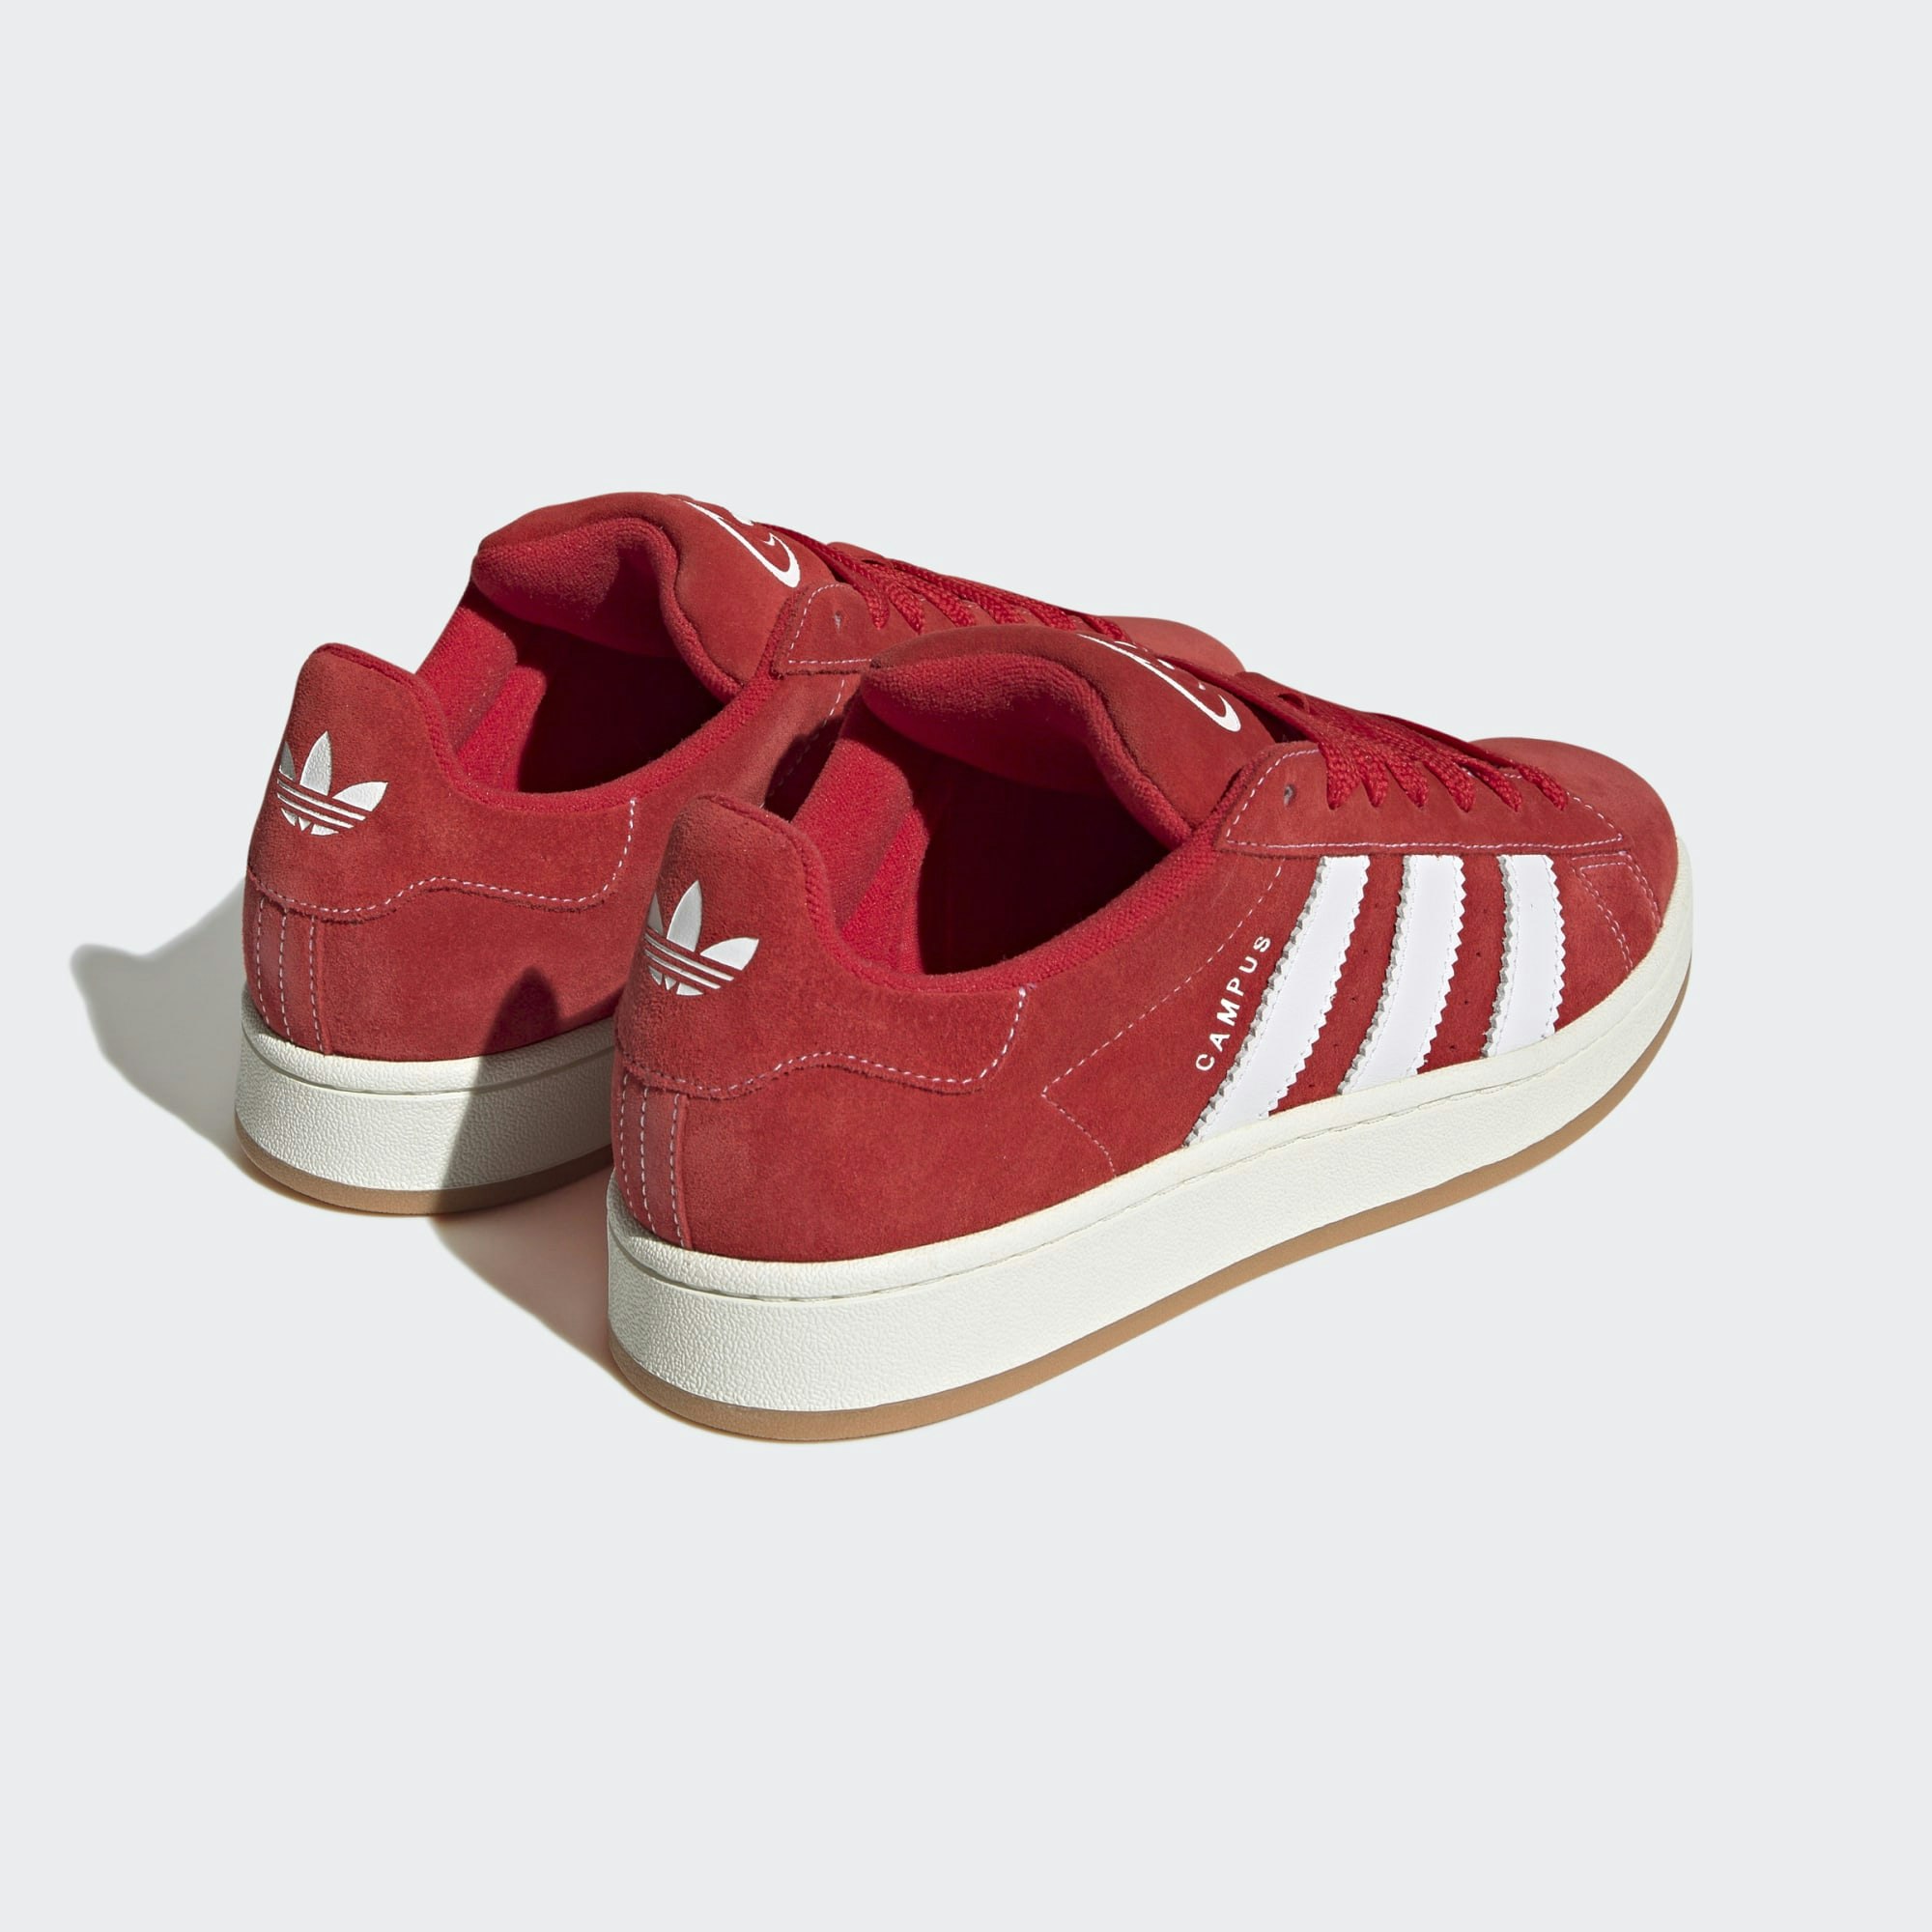 adidas Campus 00s "Better Scarlet"